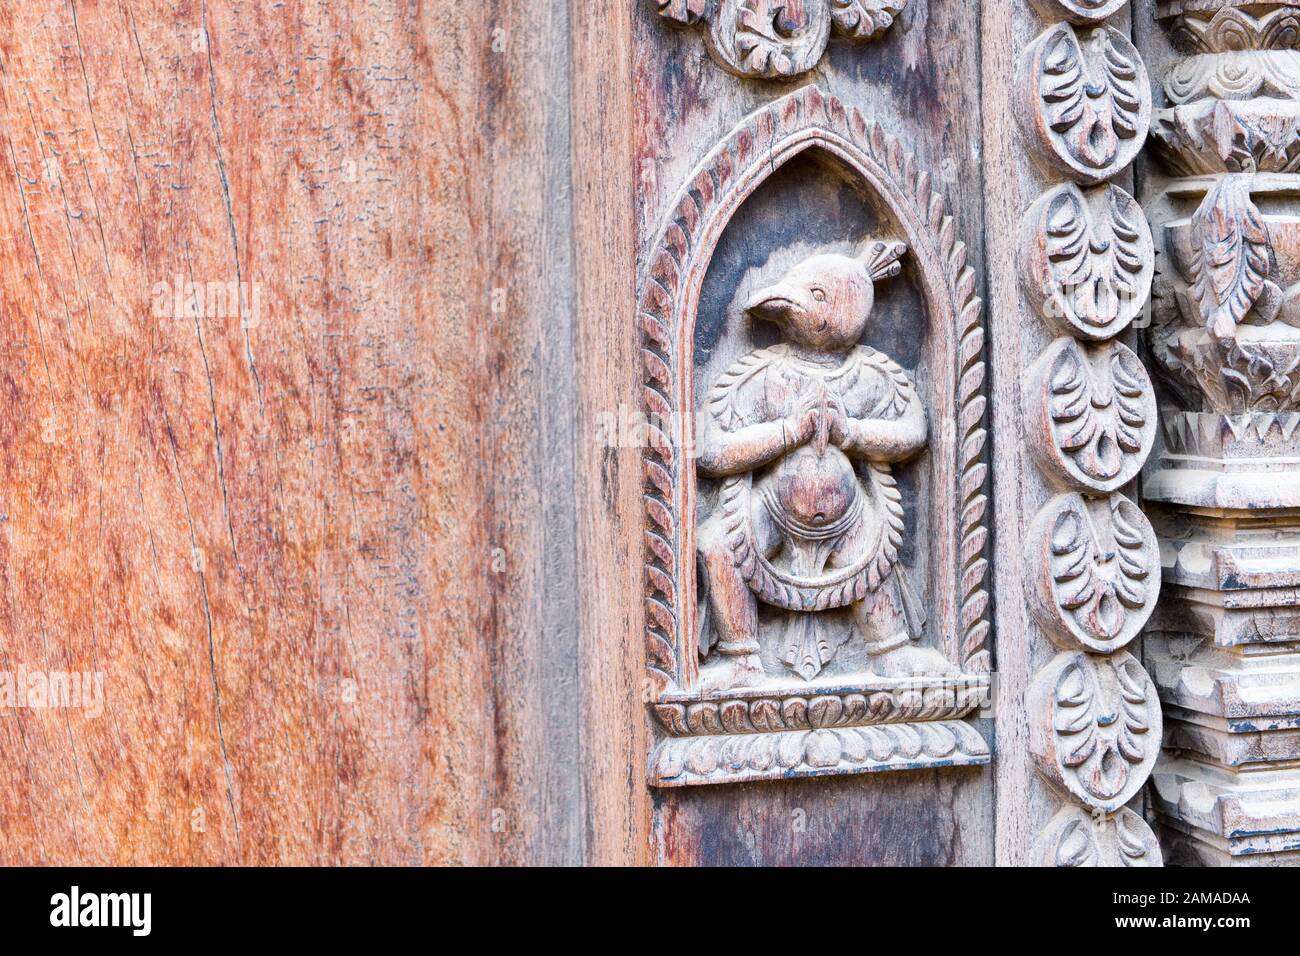 Decorative wood carving on temple door in Bhaktapur, Nepal Stock Photo